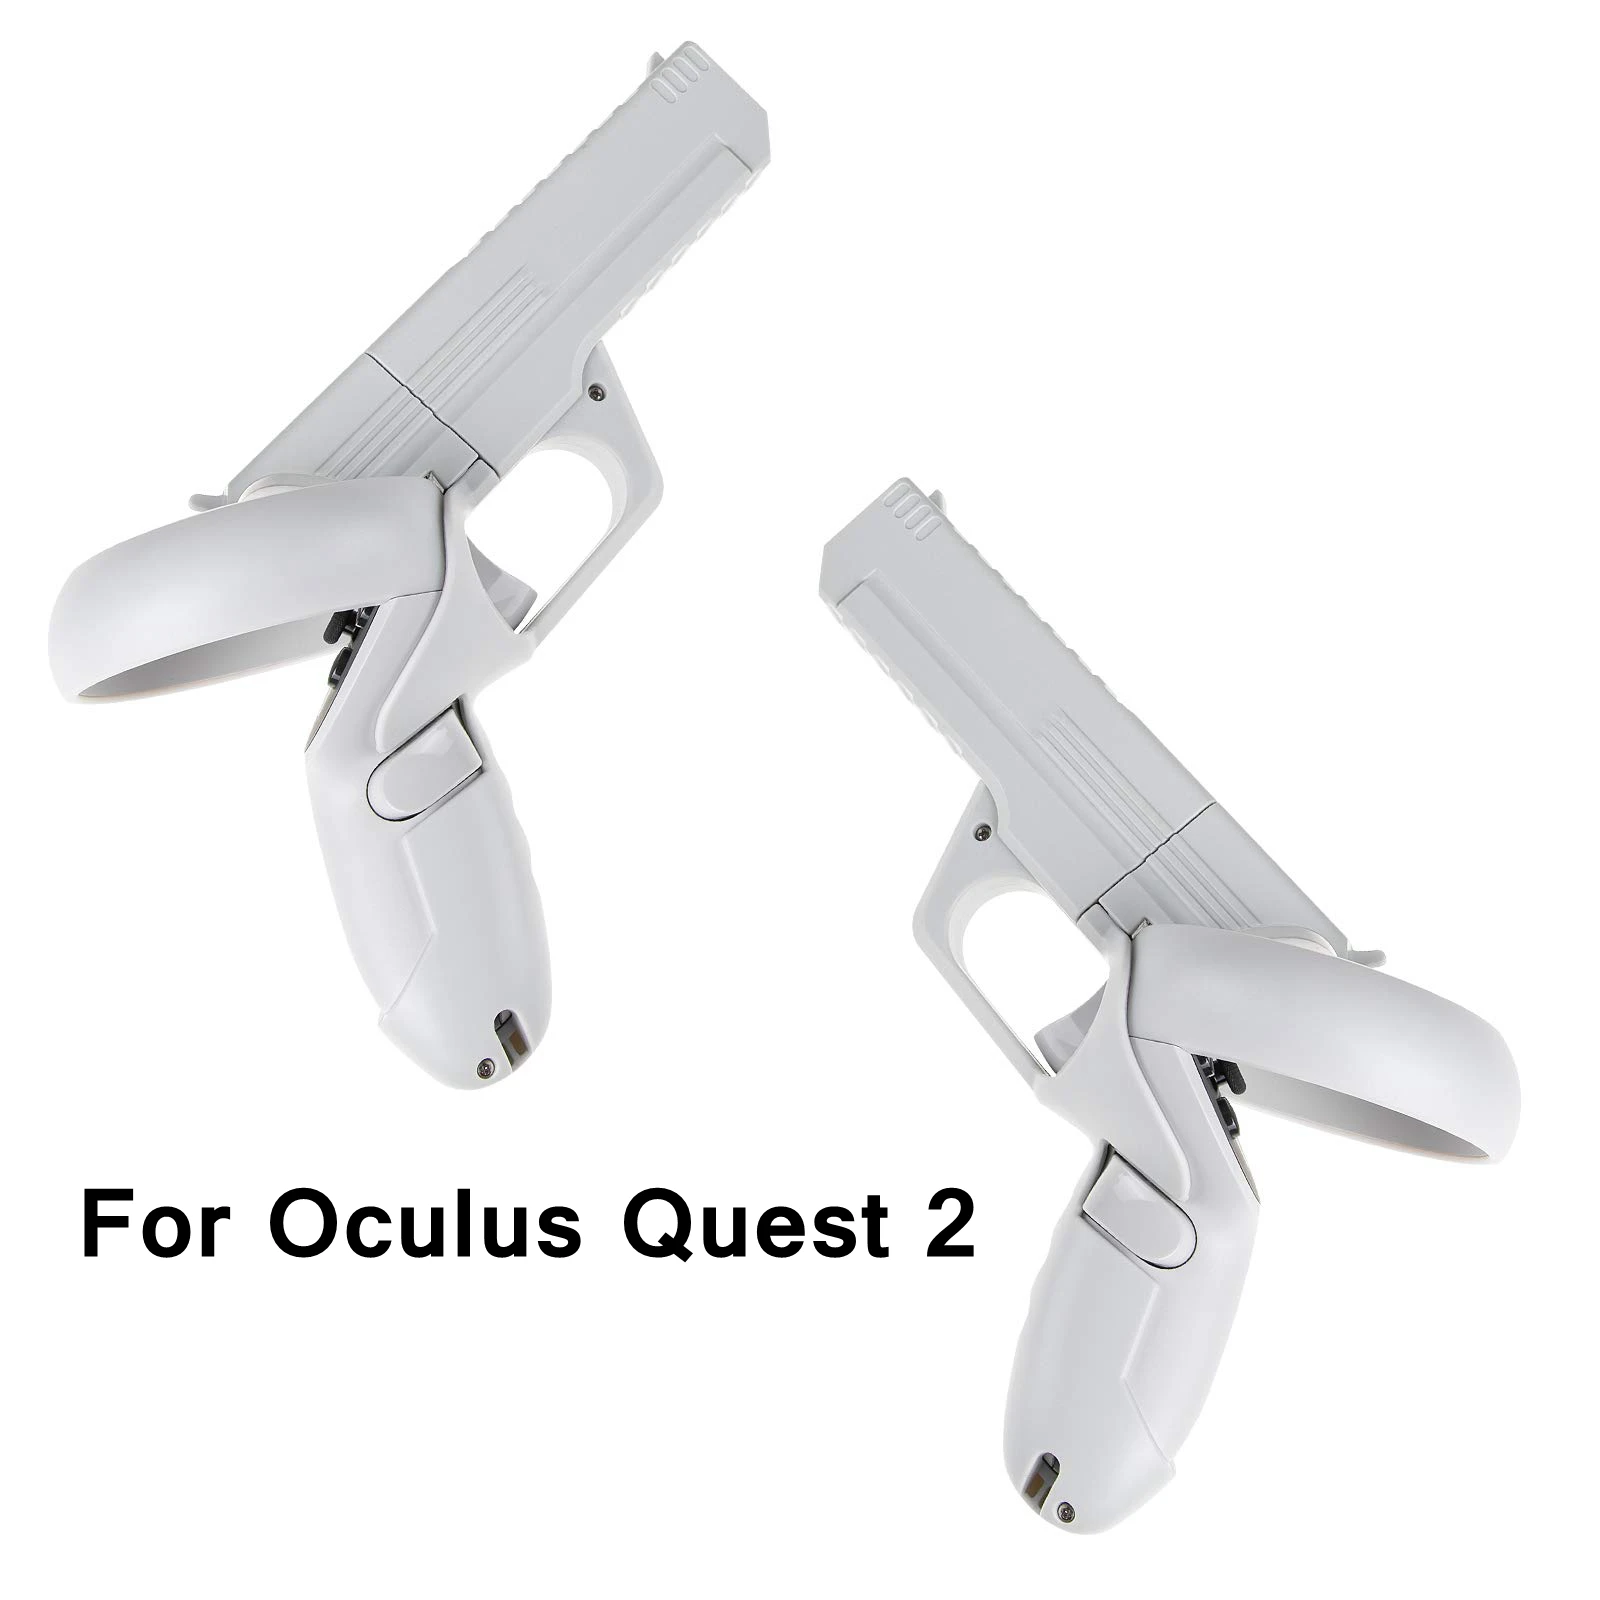 

VR Shooter Games Pistol For Oculus Quest 2 Gun Stock Controller Handle Grip Enhanced FPS Gaming Experience For Quest 2 Case